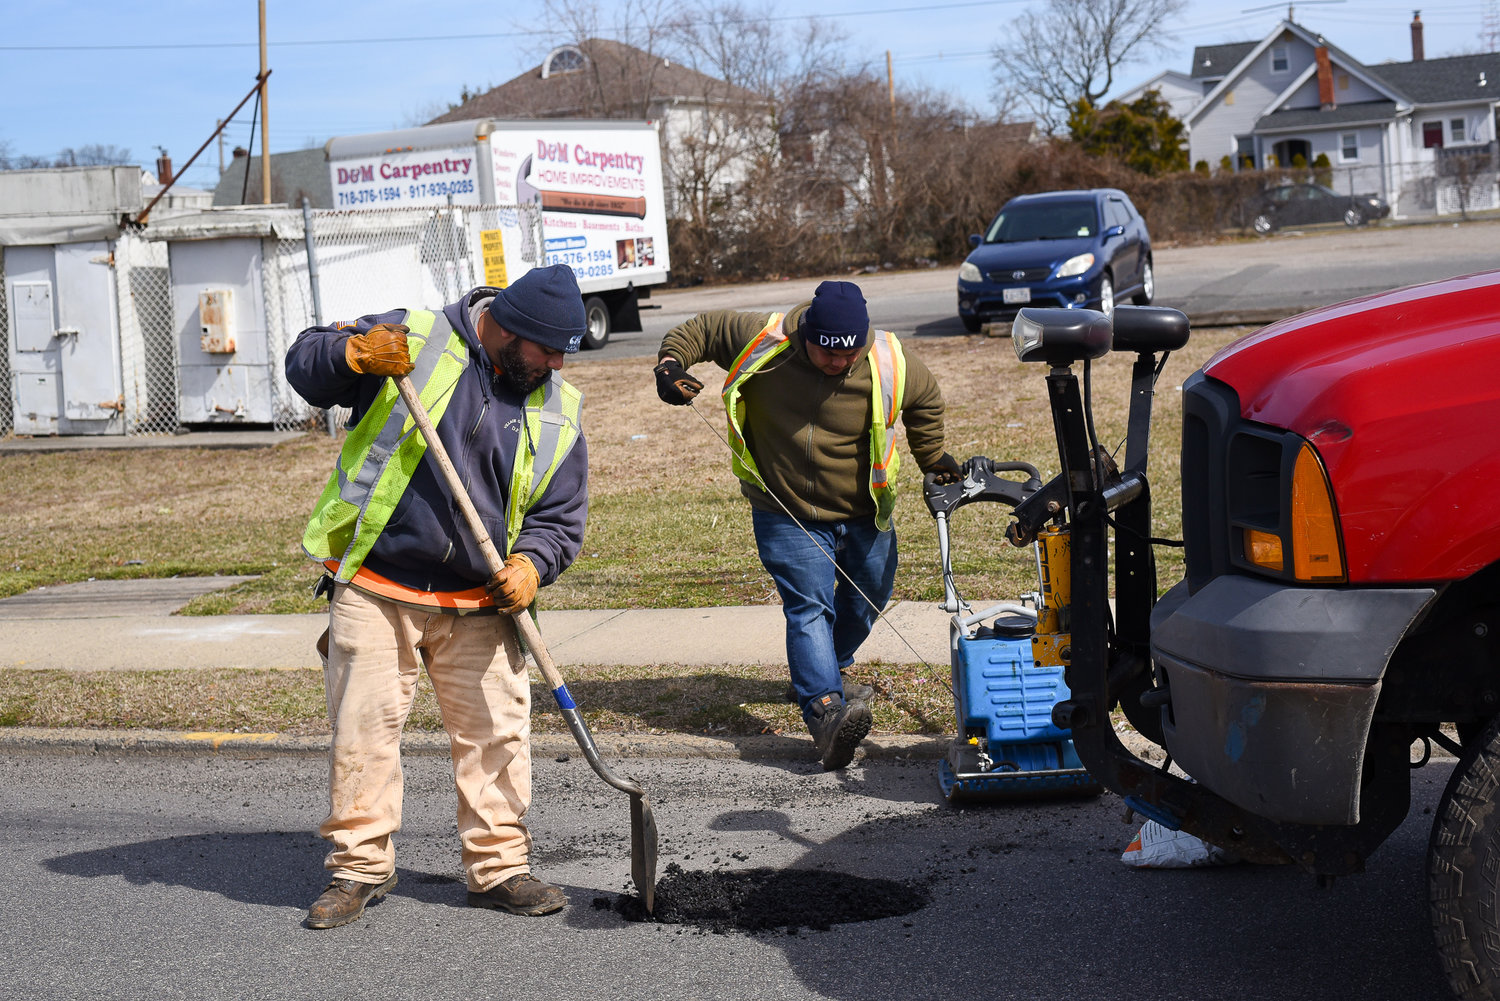 Potholes are a constant occupation for Freeport’s Department of Public Works throughout the year, but especially in the spring, when fluctuations of warm and cold temperatures force the road surface to expand and contract more rapidly than in other seasons.